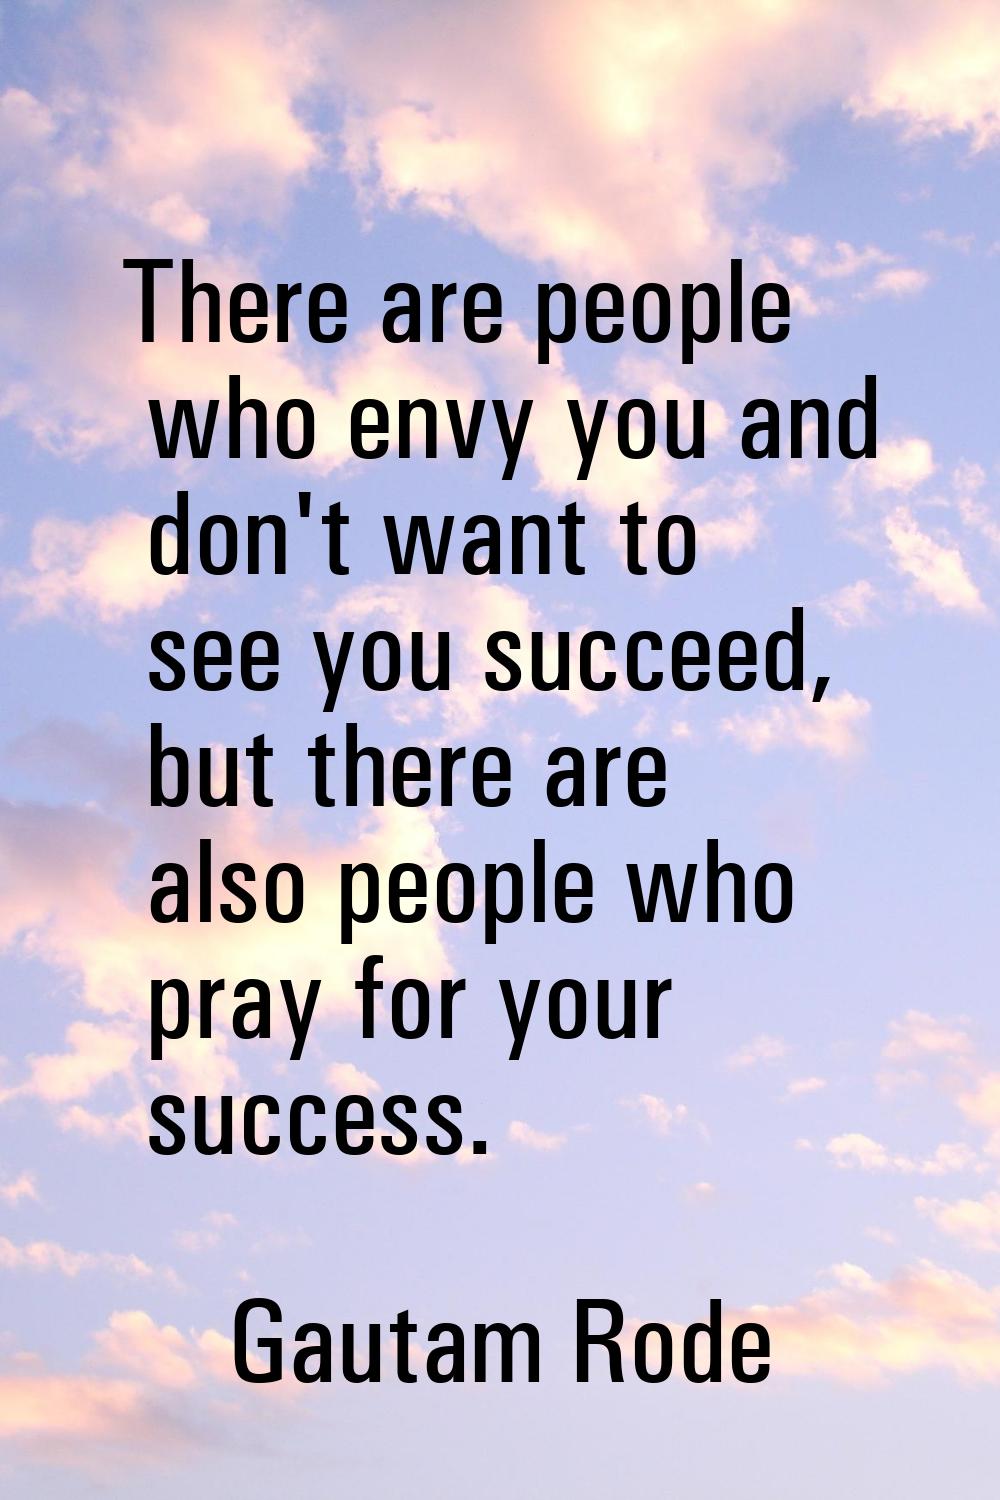 There are people who envy you and don't want to see you succeed, but there are also people who pray